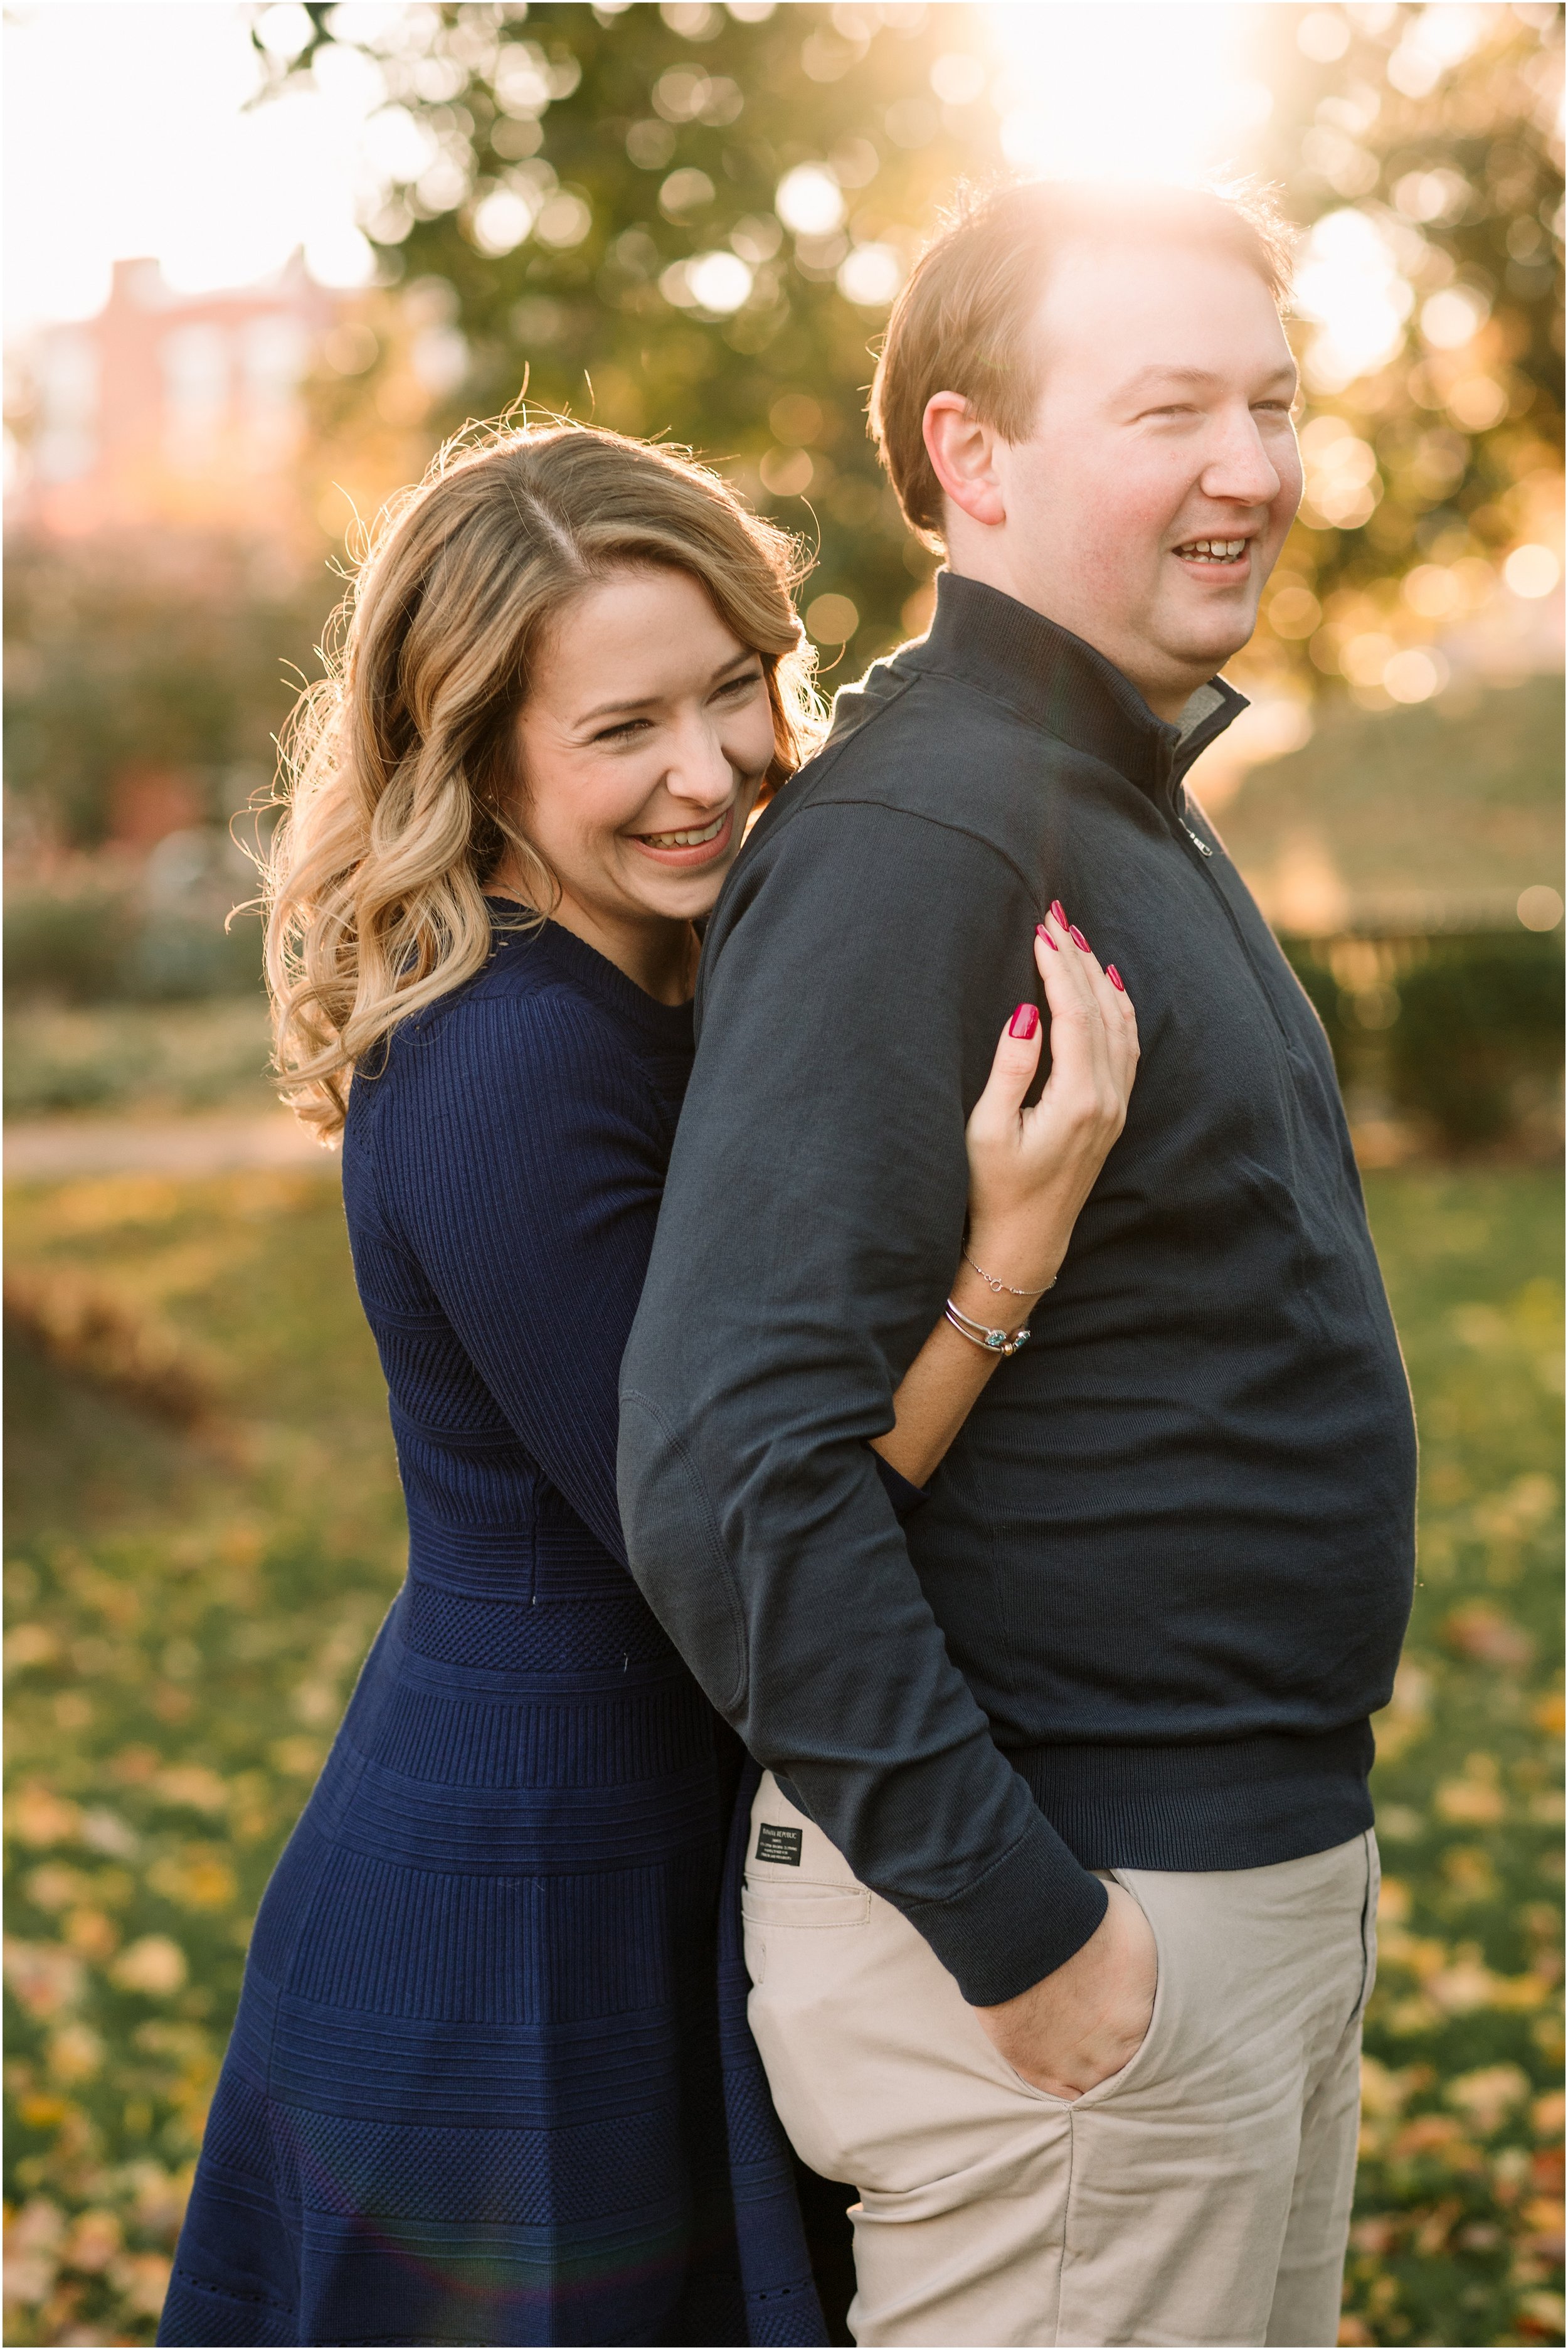 hannah leigh photography Annapolis MD Engagement Session_2358.jpg